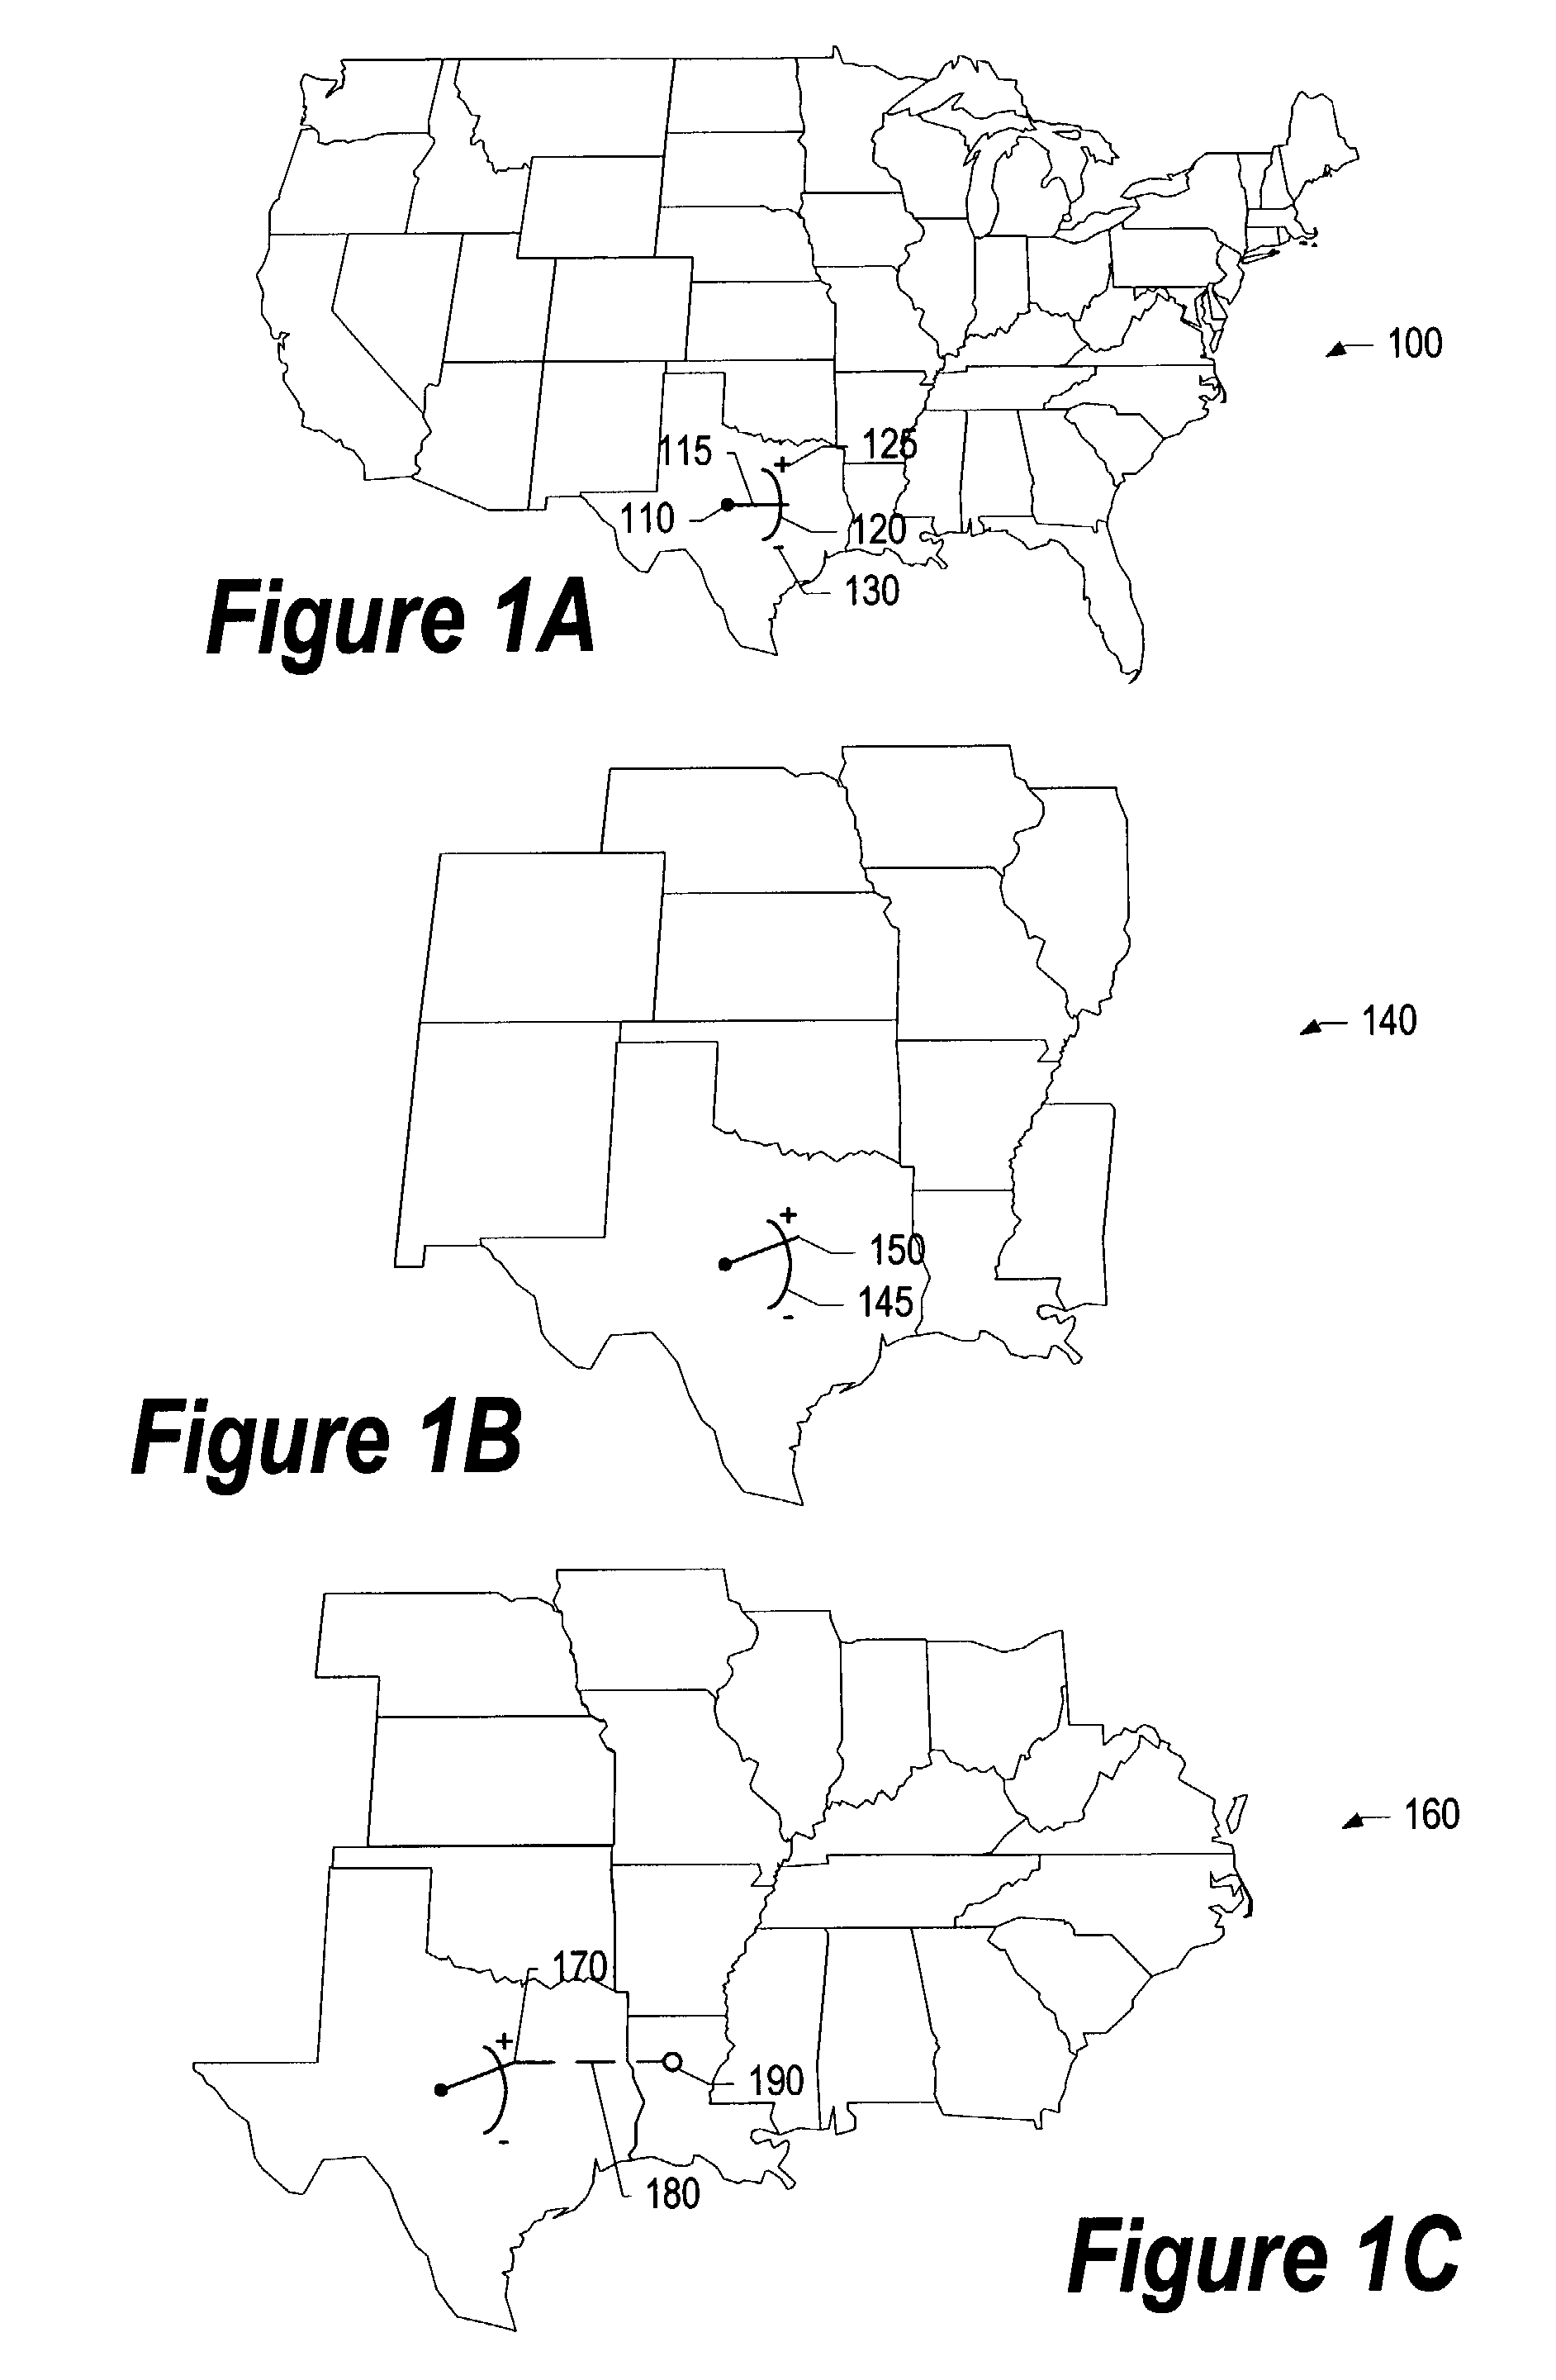 System and method for display views using a single stroke control